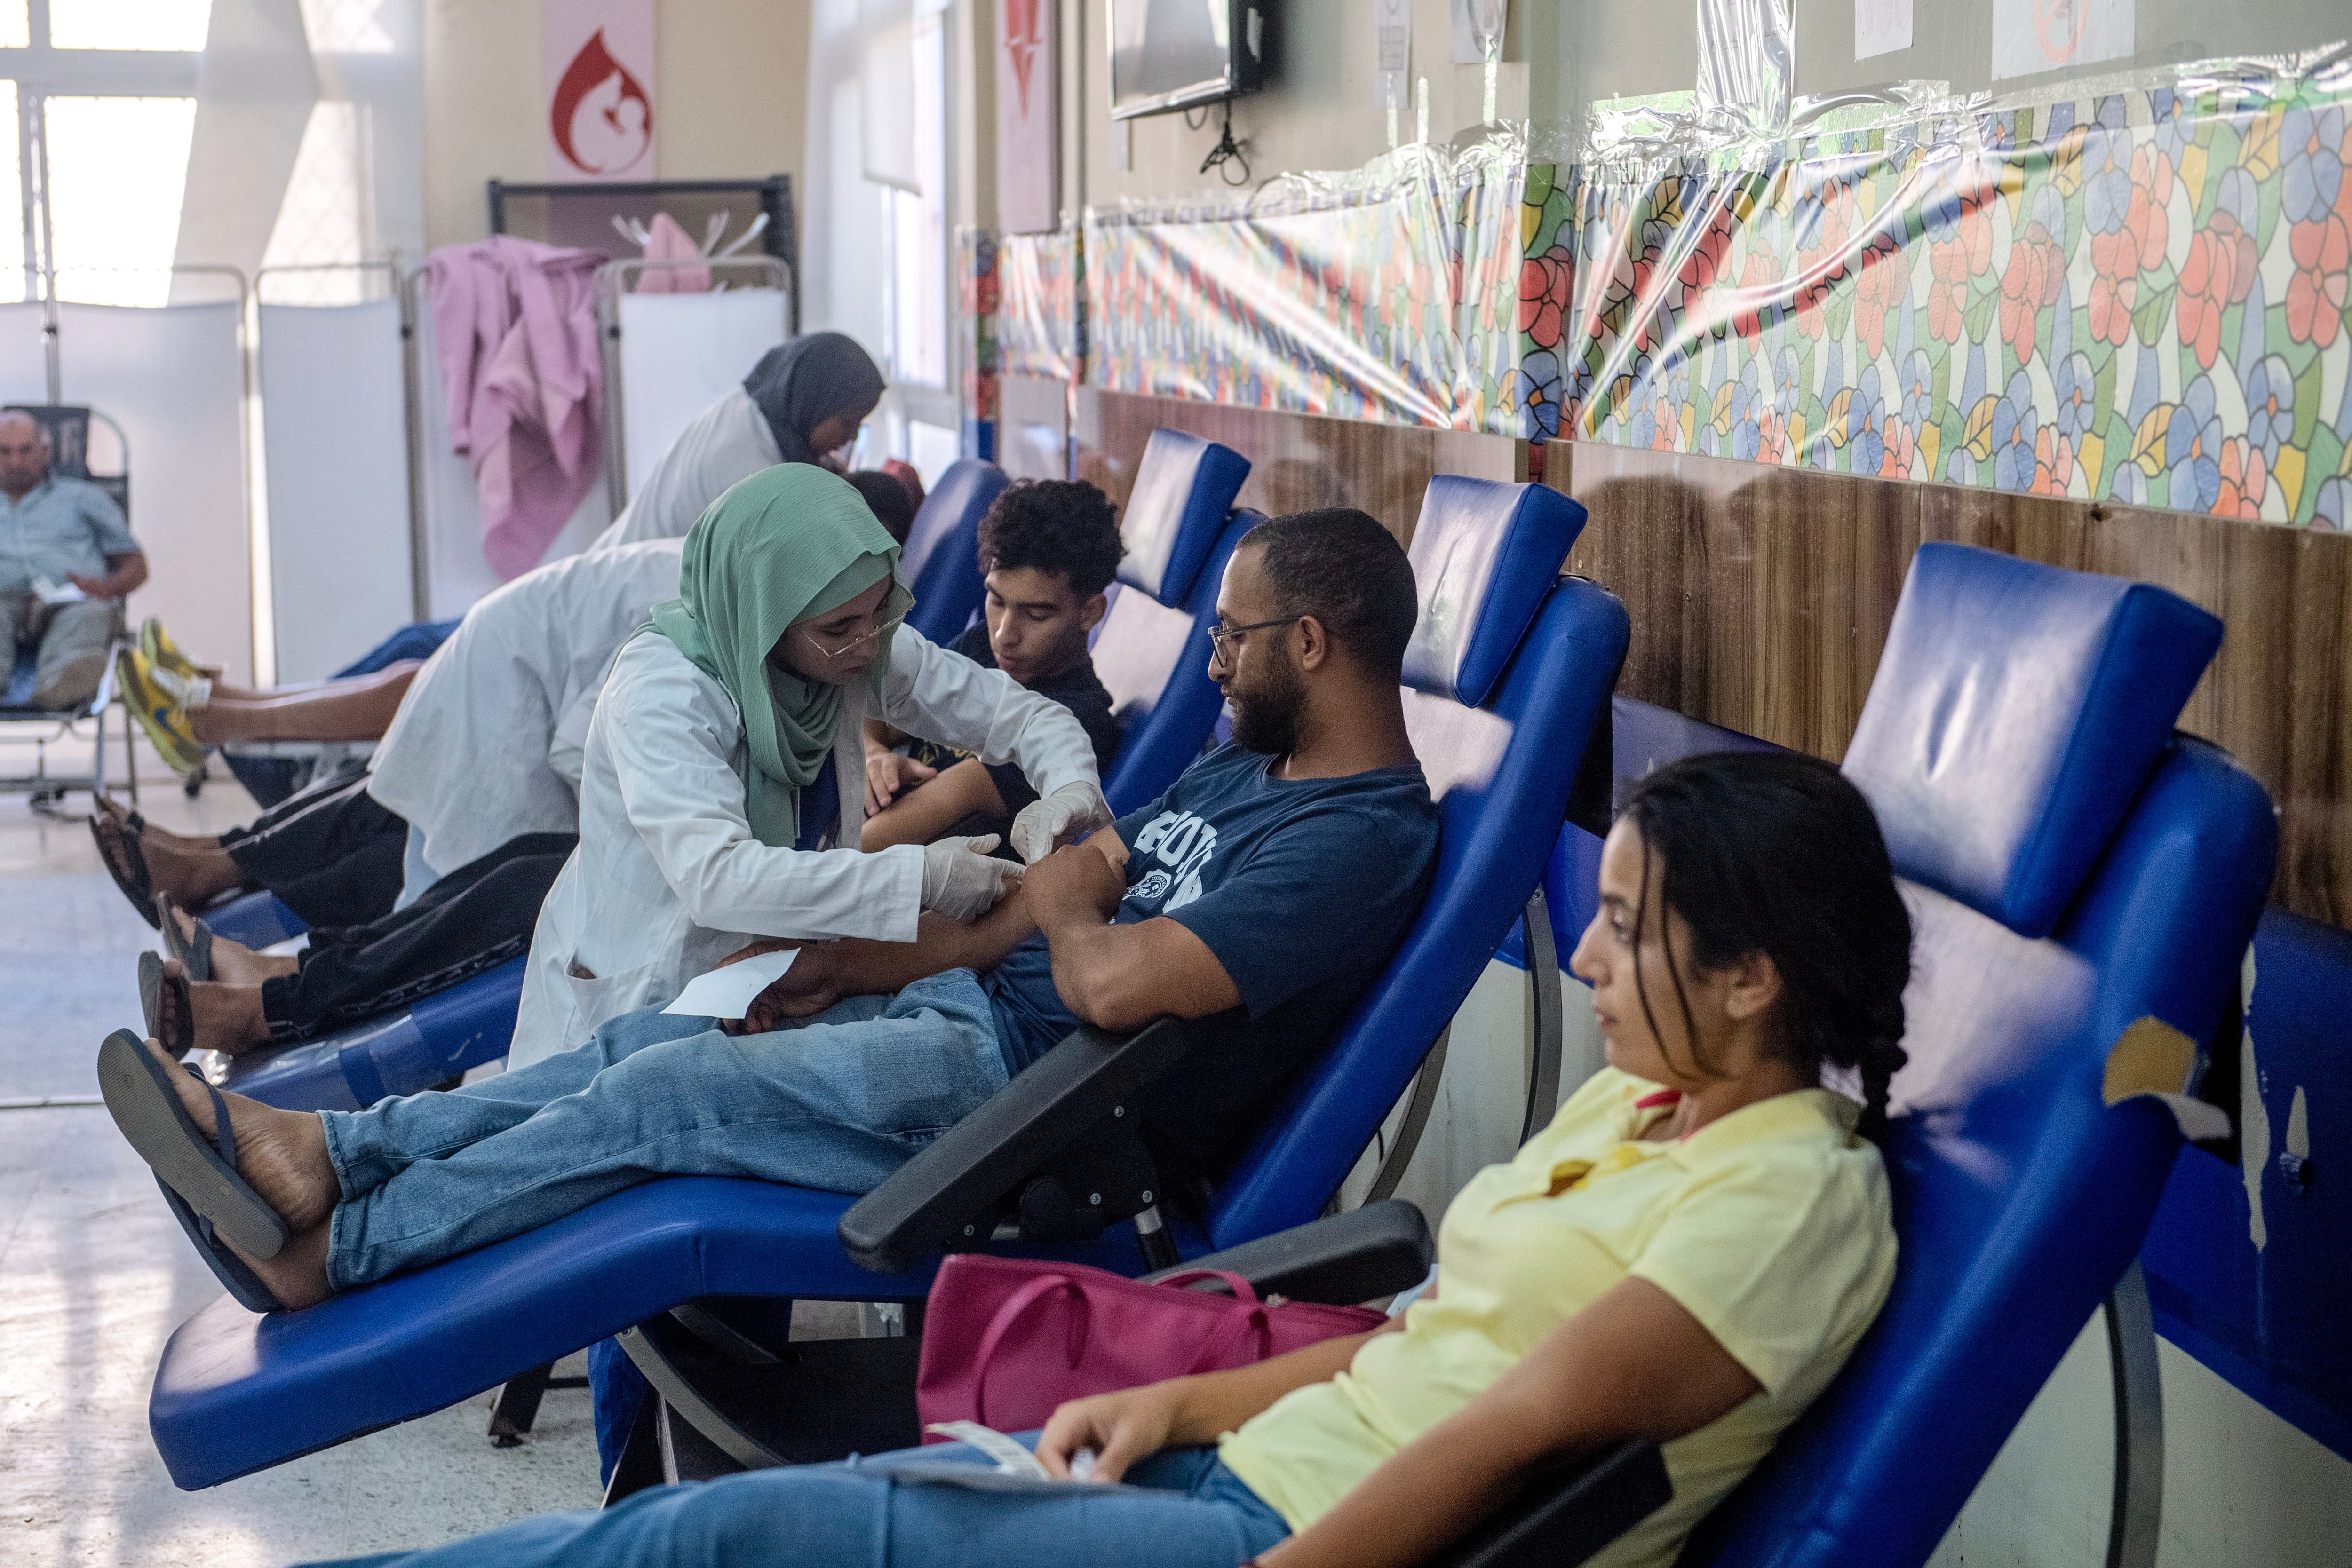 Marrakech (Morocco), 11/09/2023.- Moroccan citizens and tourists sit inside a blood transfusion center to donate blood for the victims of a powerful earthquake in Marrakech, Morocco, 11 September 2023. A magnitude 6.8 earthquake that struck central Morocco late 08 September has killed more than 2,000 people and injured around 2,500 others, damaging buildings from villages and towns in the Atlas Mountains to Marrakech, according to a report released by the country's Interior Ministry. The earthquake has affected more than 300,000 people in Marrakech and its outskirts, the UN Office for the Coordination of Humanitarian Affairs (OCHA) said. Morocco's King Mohammed VI on 09 September declared a three-day national mourning for the victims of the earthquake. (Terremoto/sismo, Marruecos) EFE/EPA/JALAL MORCHIDI
